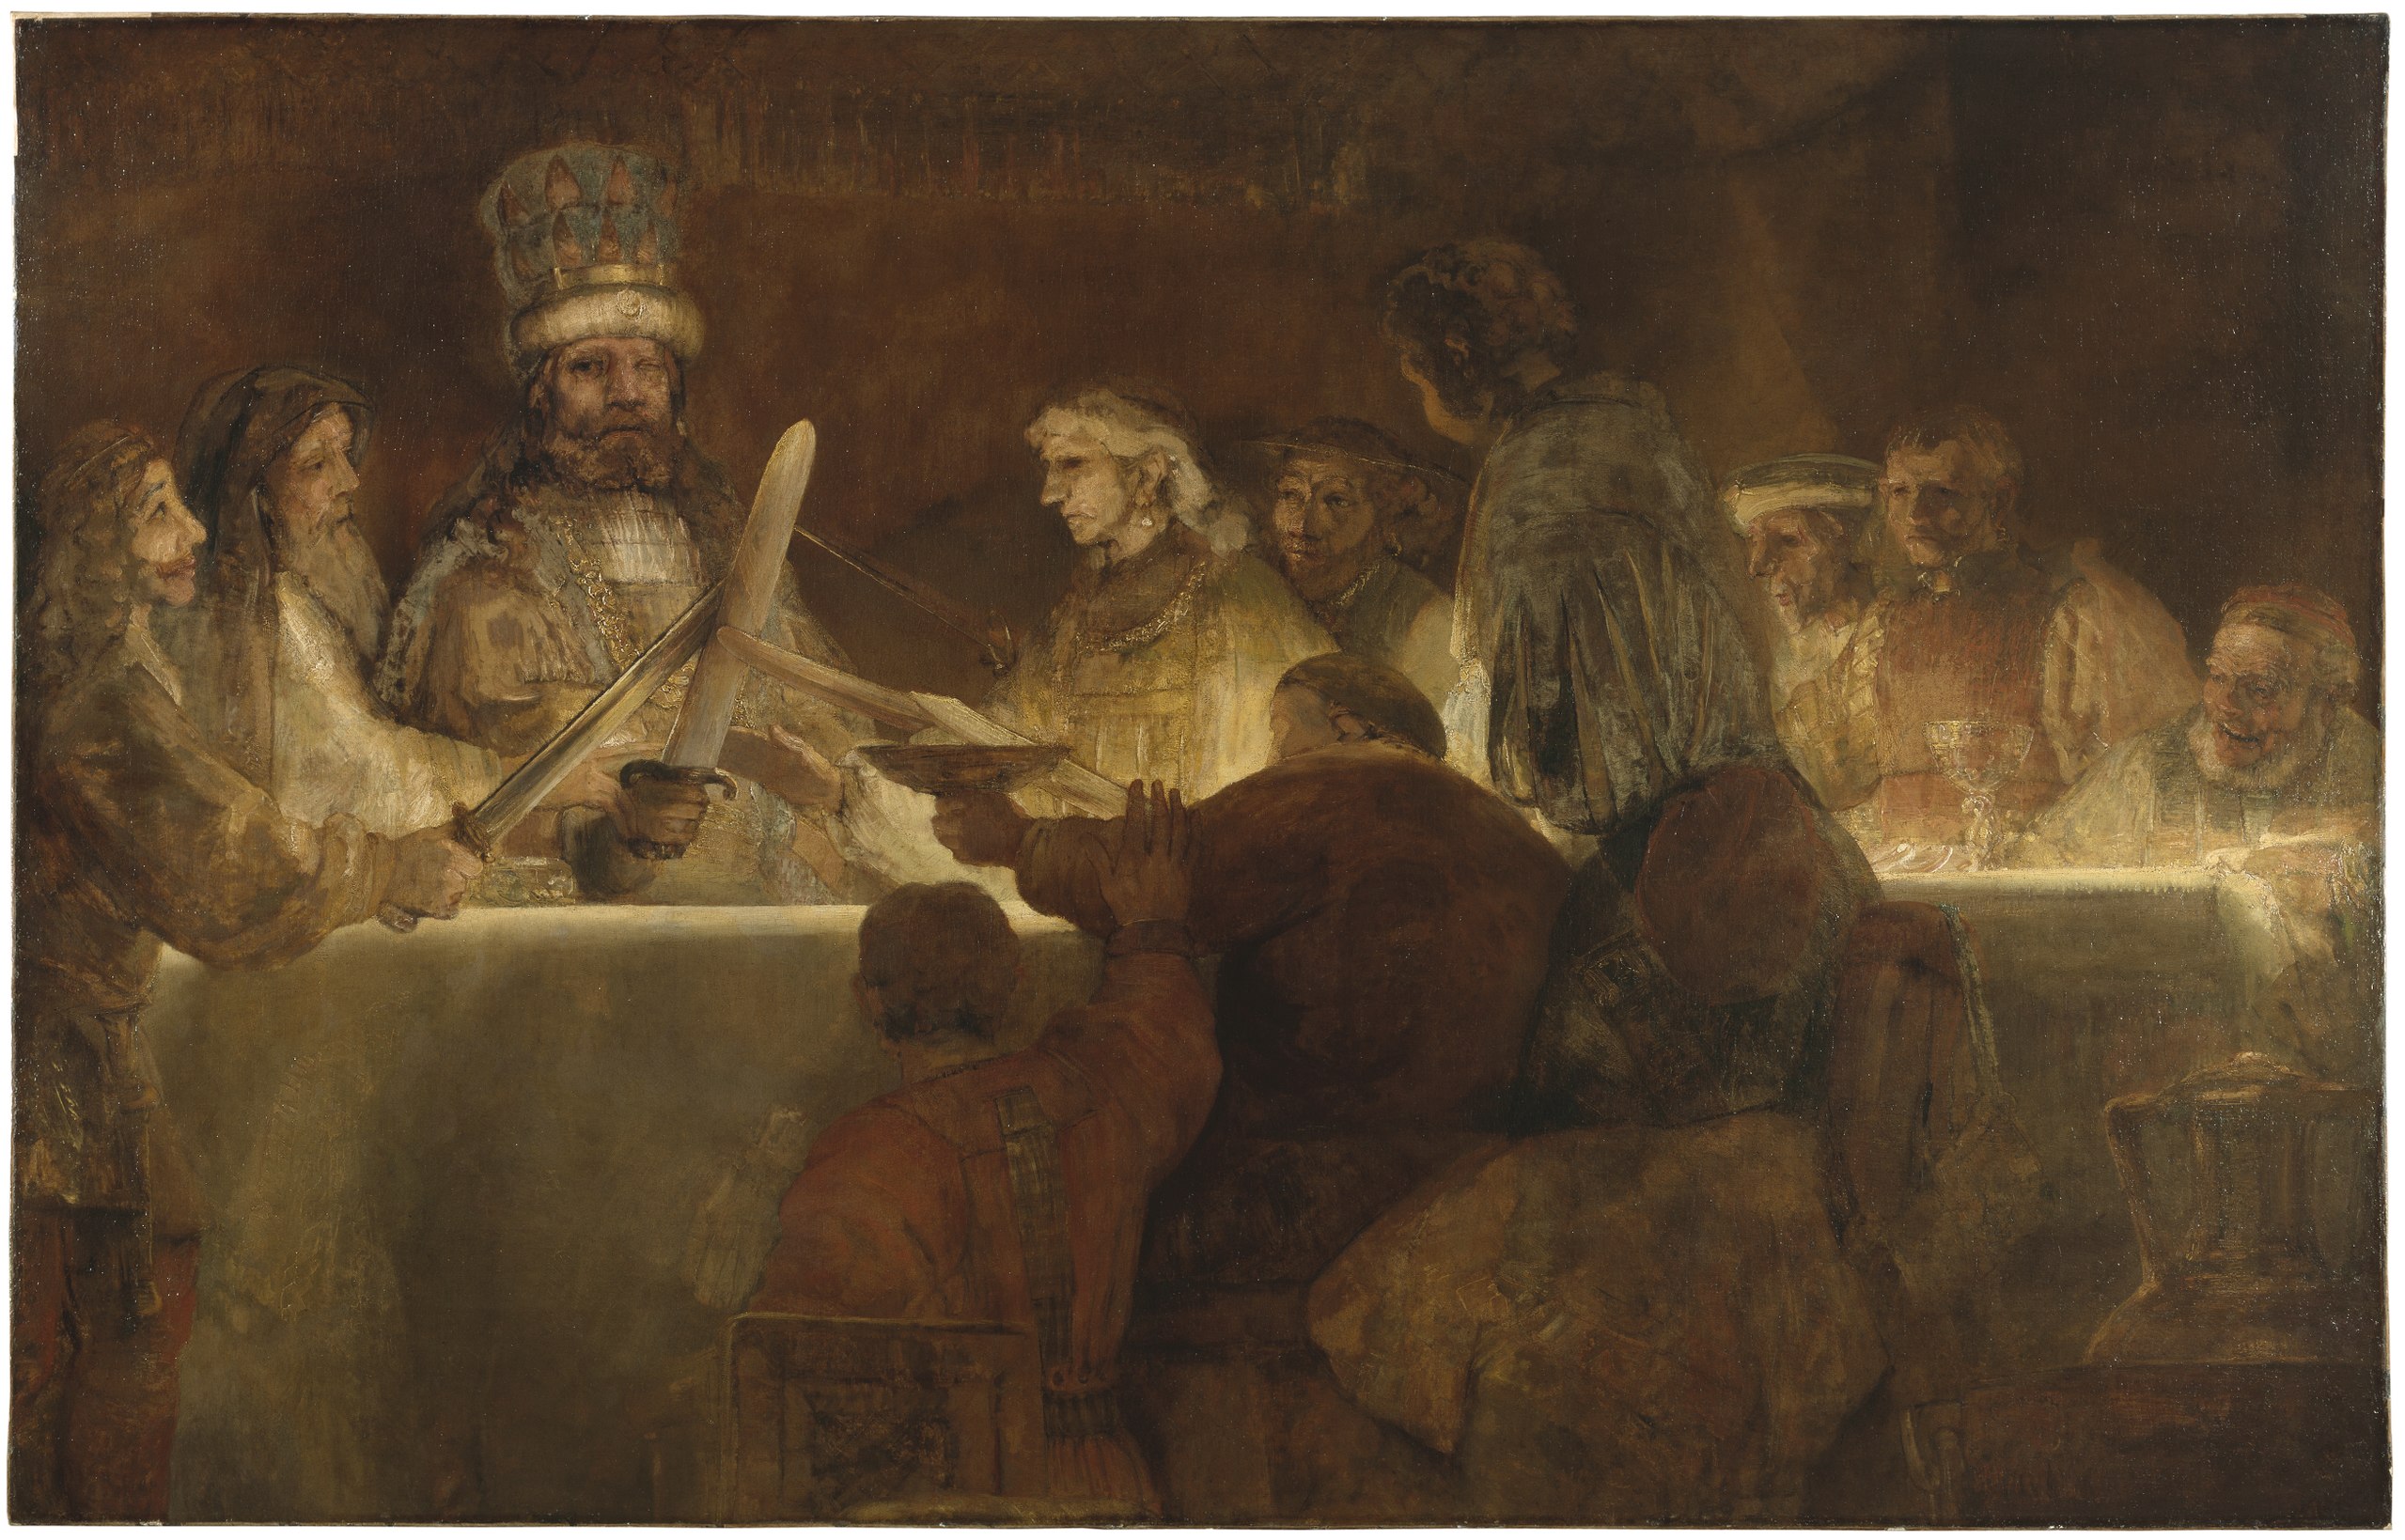 The Last Supper by Rembrandt.